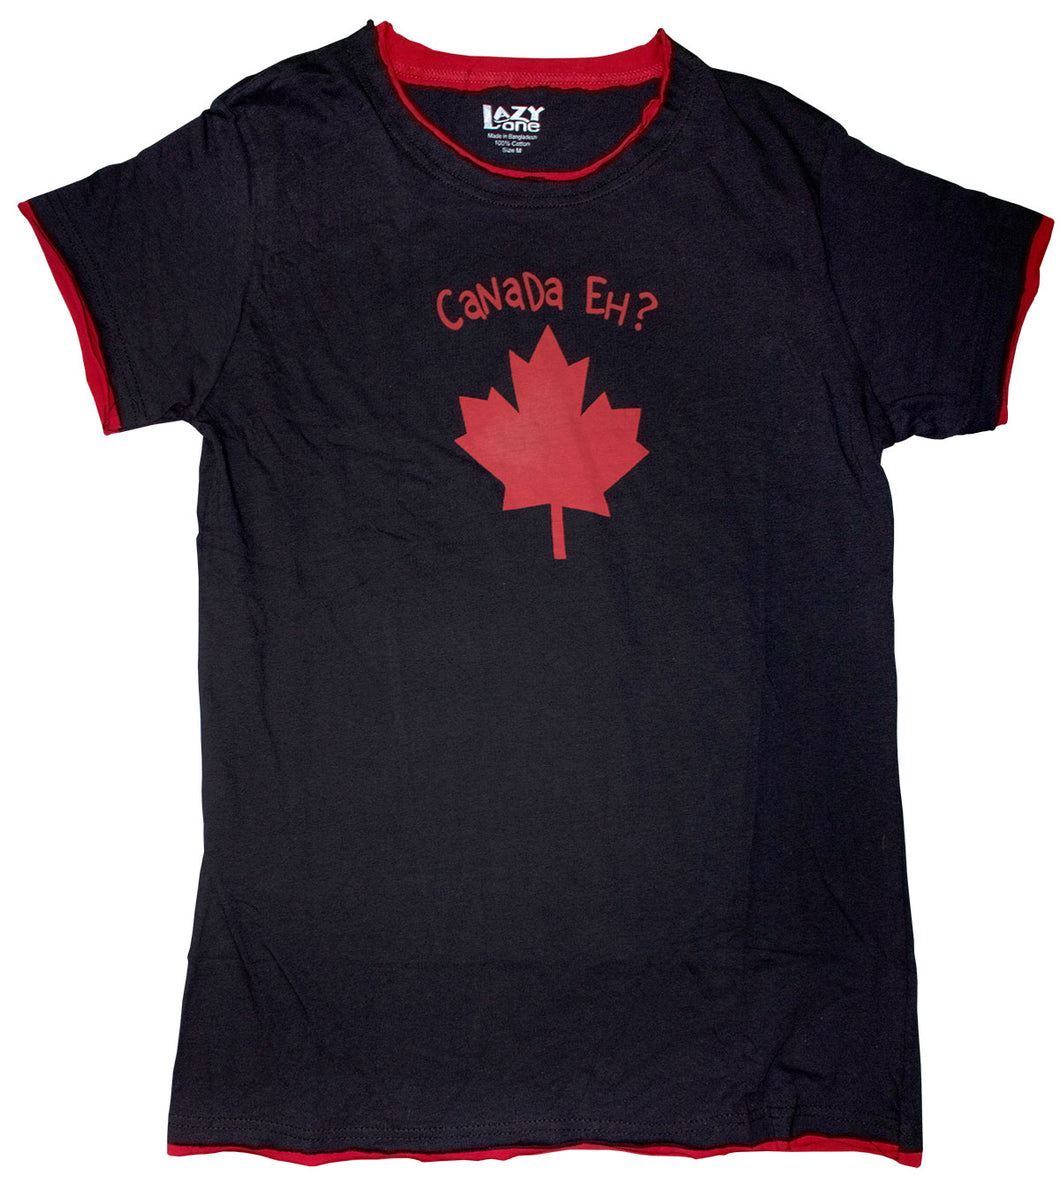 Canada Eh? Black Women's Fitted Tee